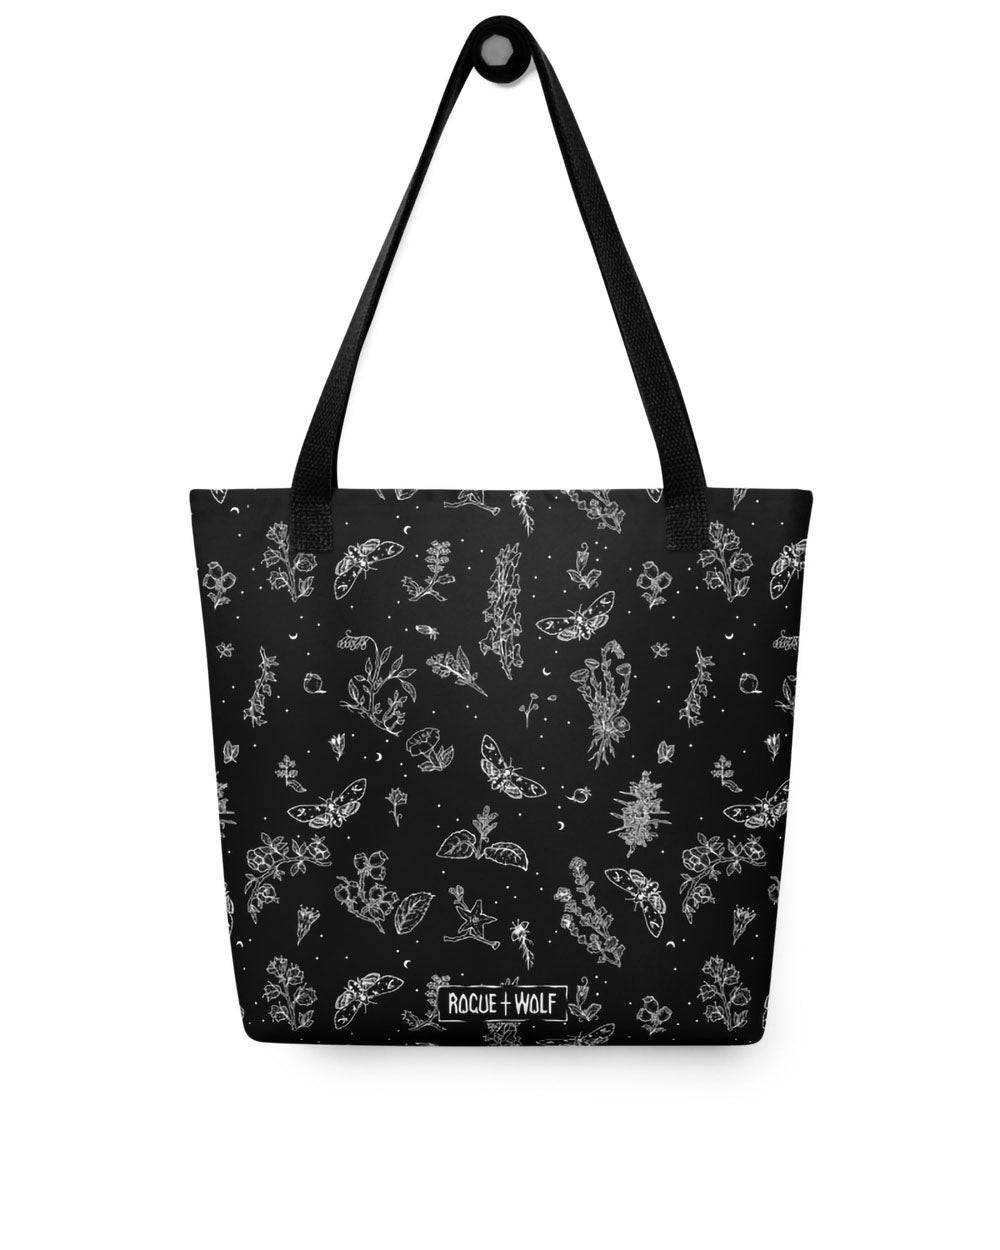 Nightshade Tote Bag - Vegan Tote for Women Foldable Bag for Work Gym Travel Shopping Grocery Cottagecore